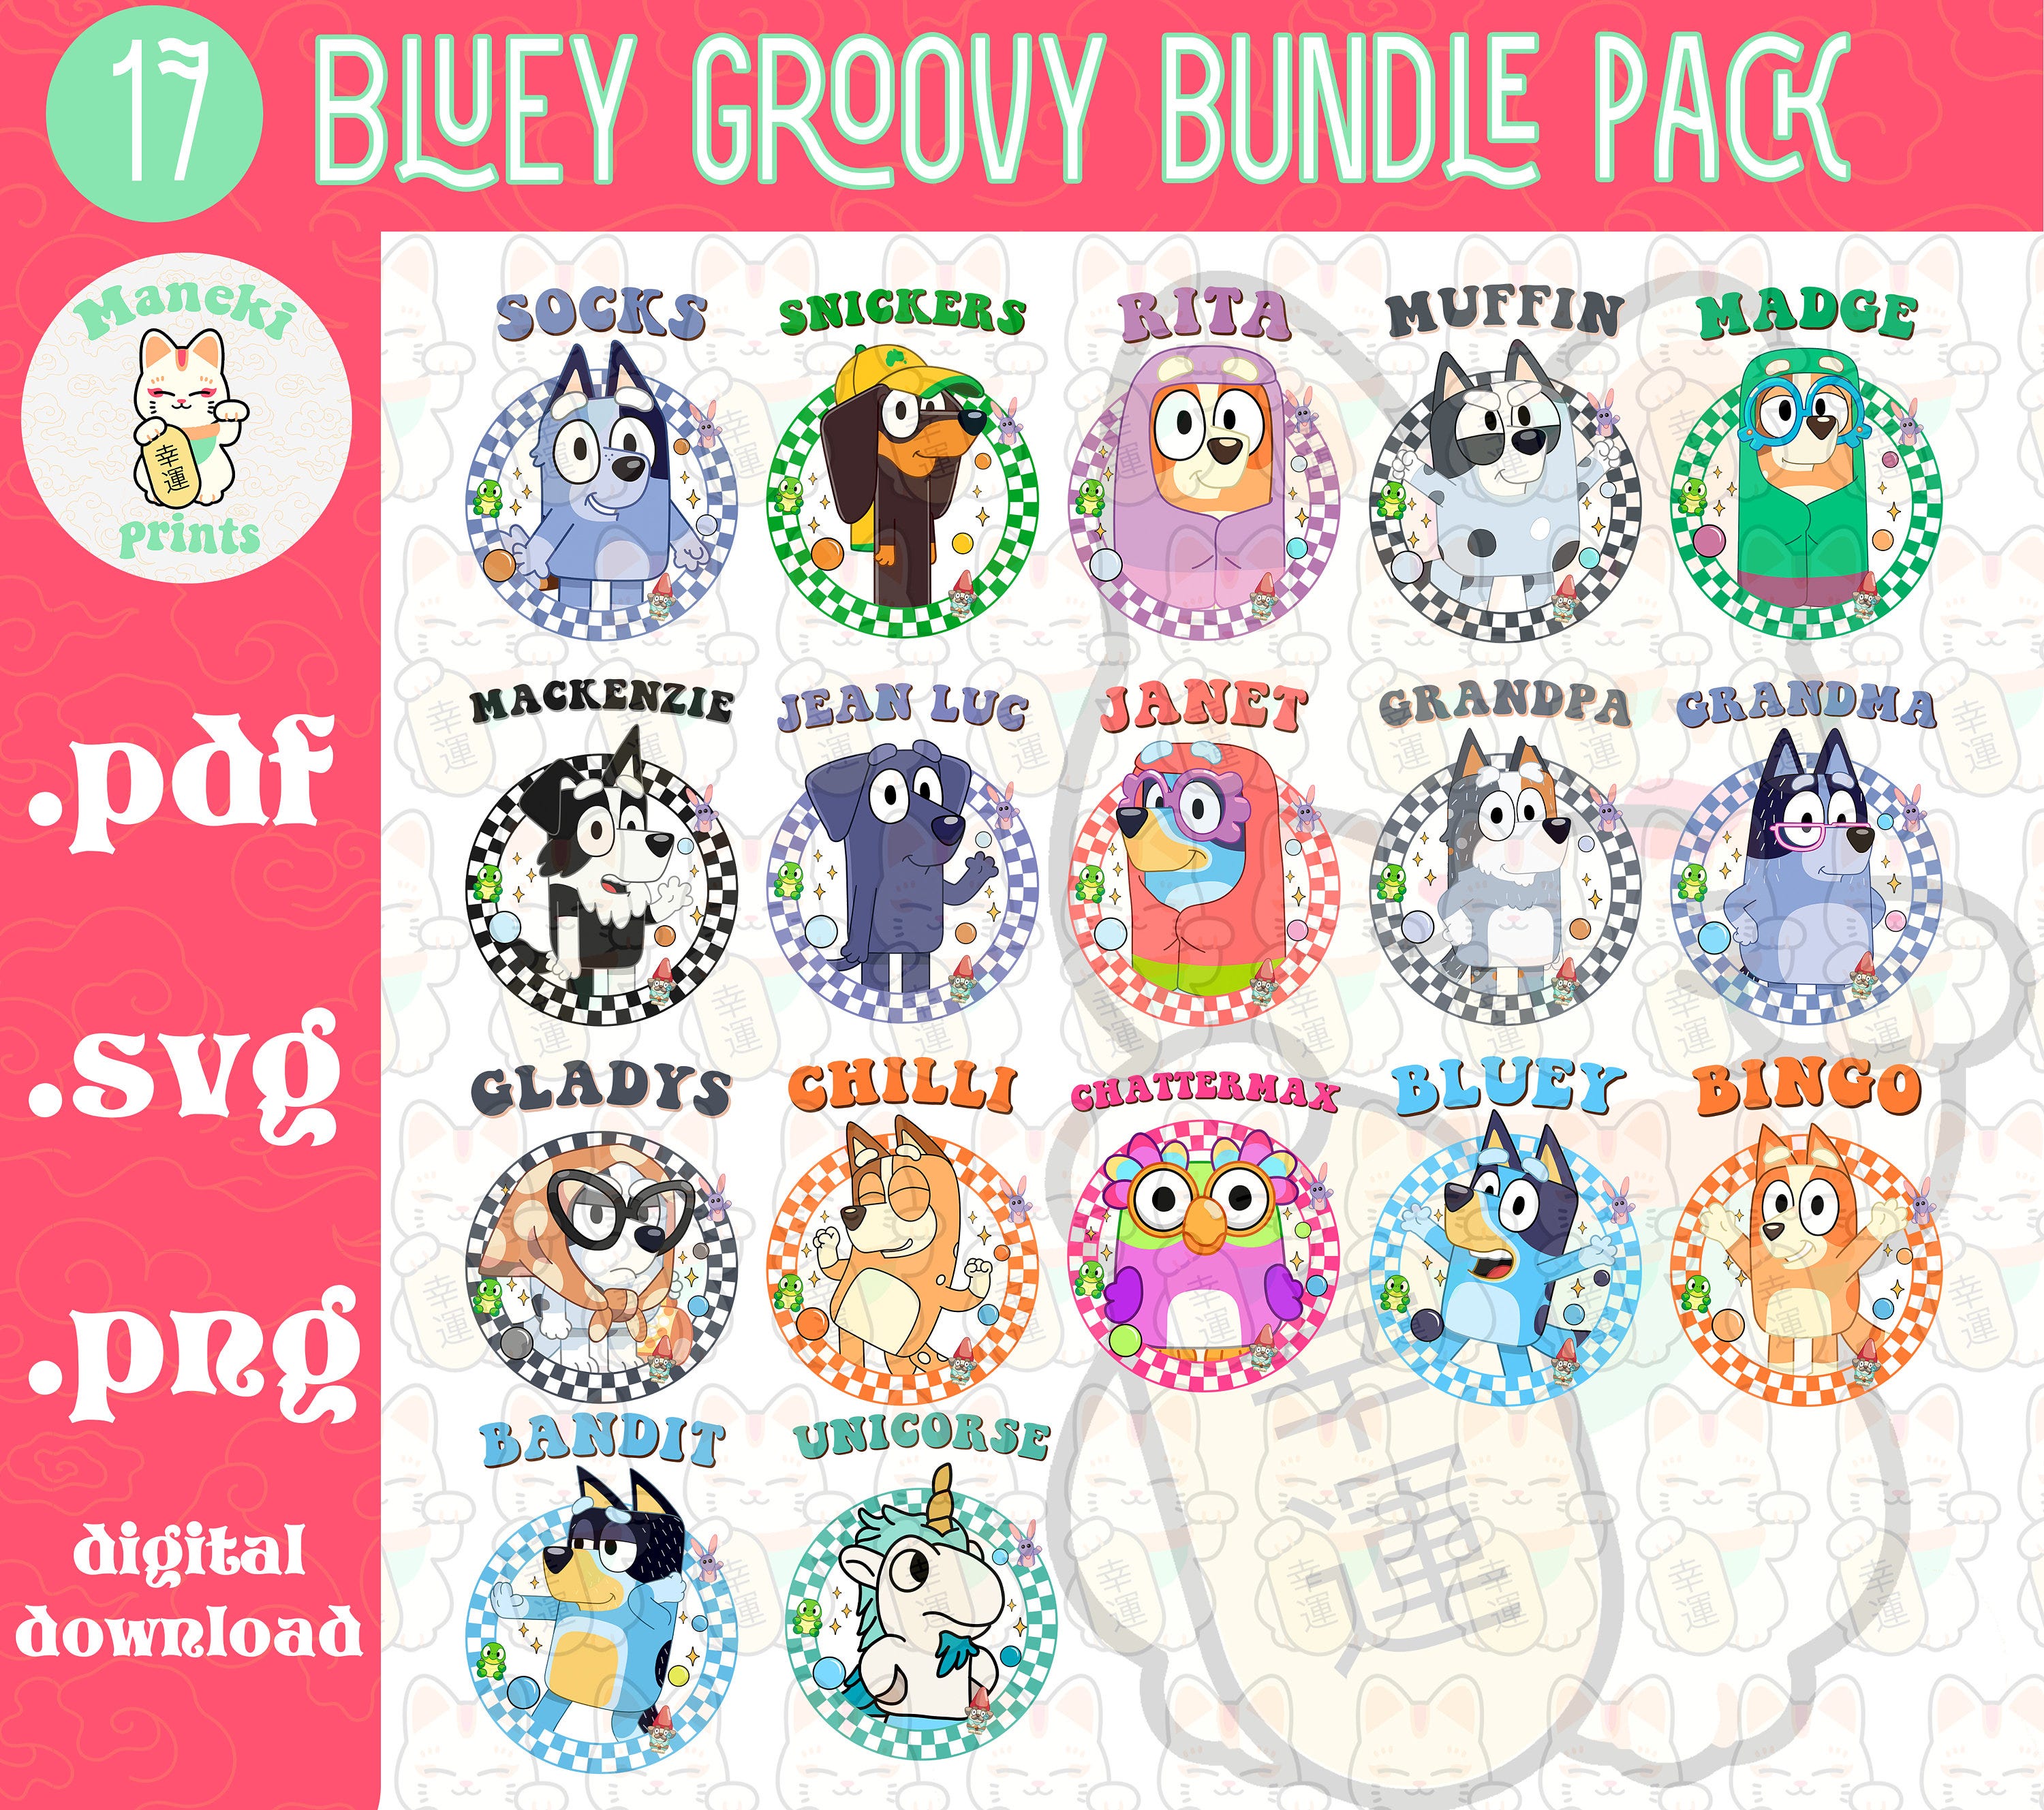 Blue dog and his friend svg groovy pack/ Bingo groovy svg/ Bandit groovy svg/ Bluueyy svg groovy